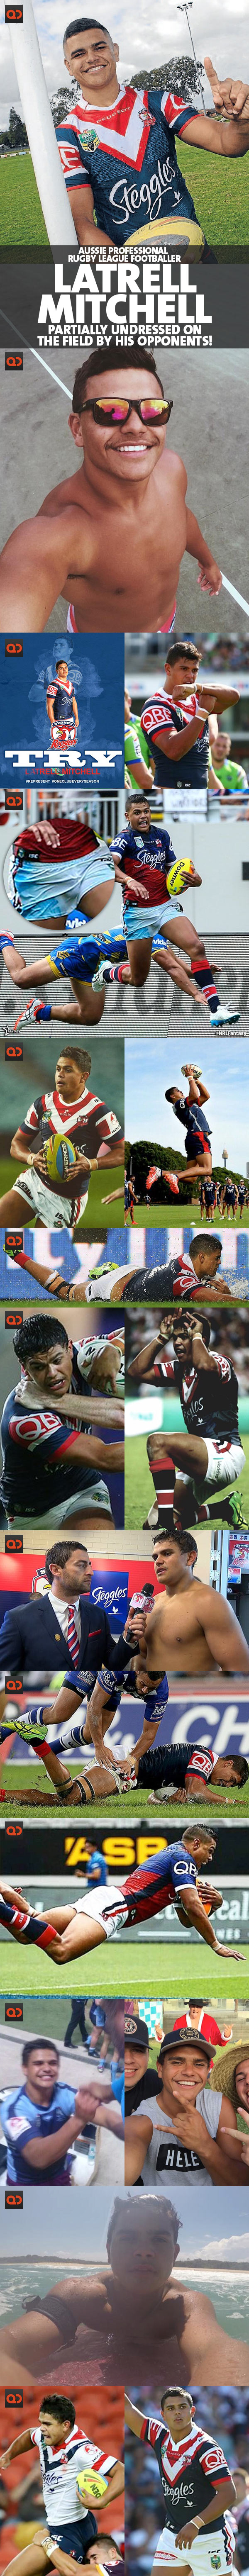 qc-latrell_mitchell_aussie_pro_rugby_footballer_undressed_on_the_field_by_opponents-collage01